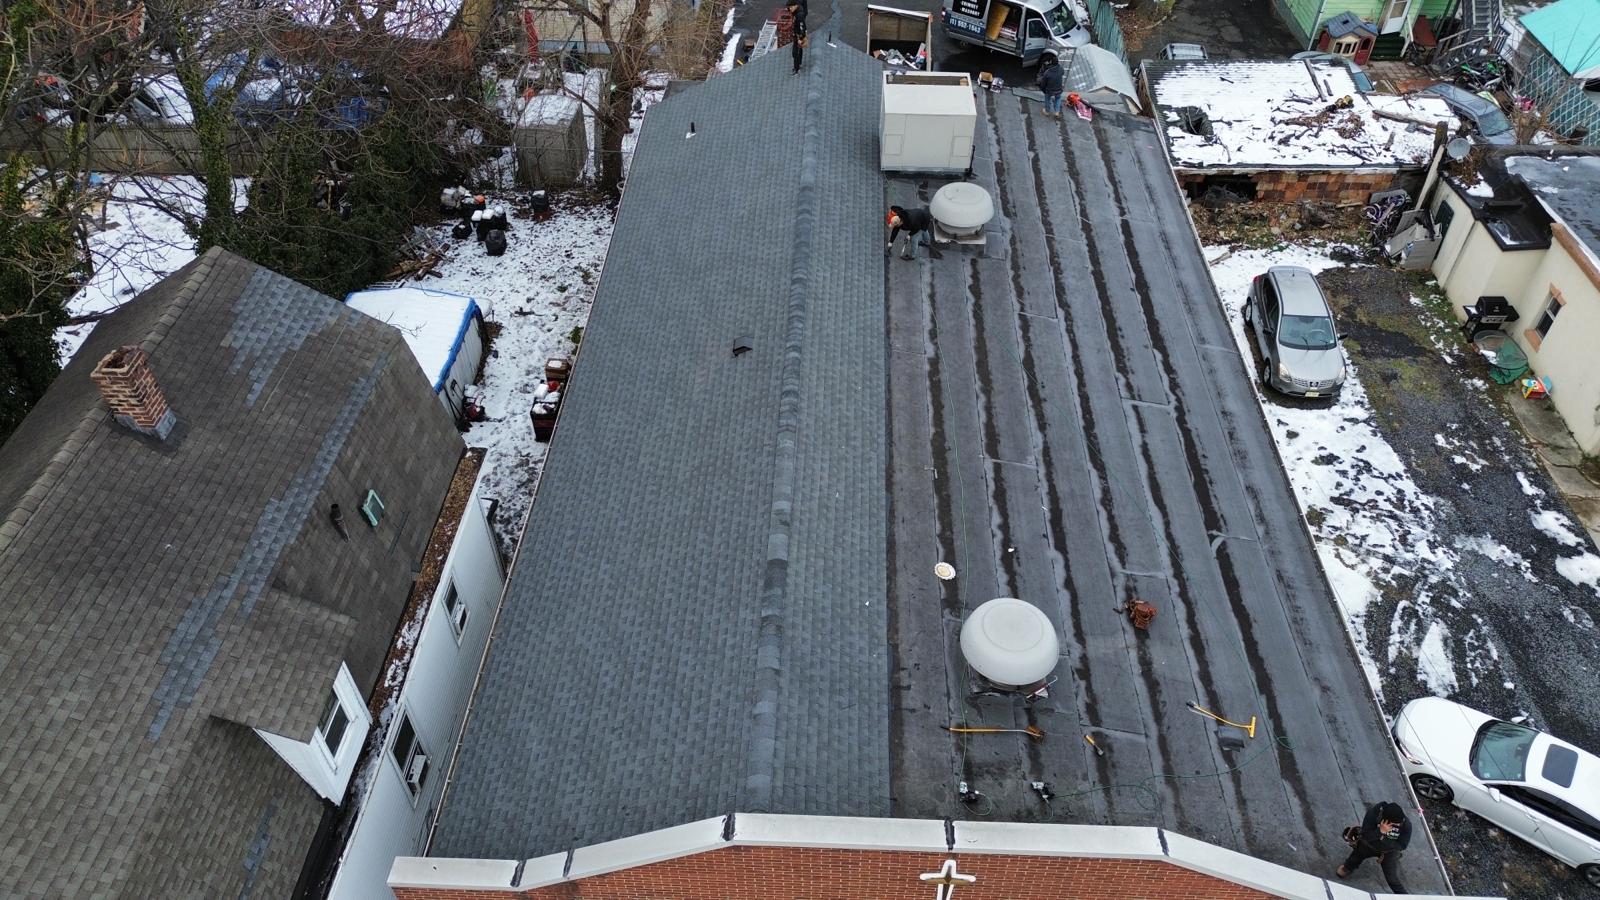 New Roof Installation in Perth Amboy NJ Project Shot 20